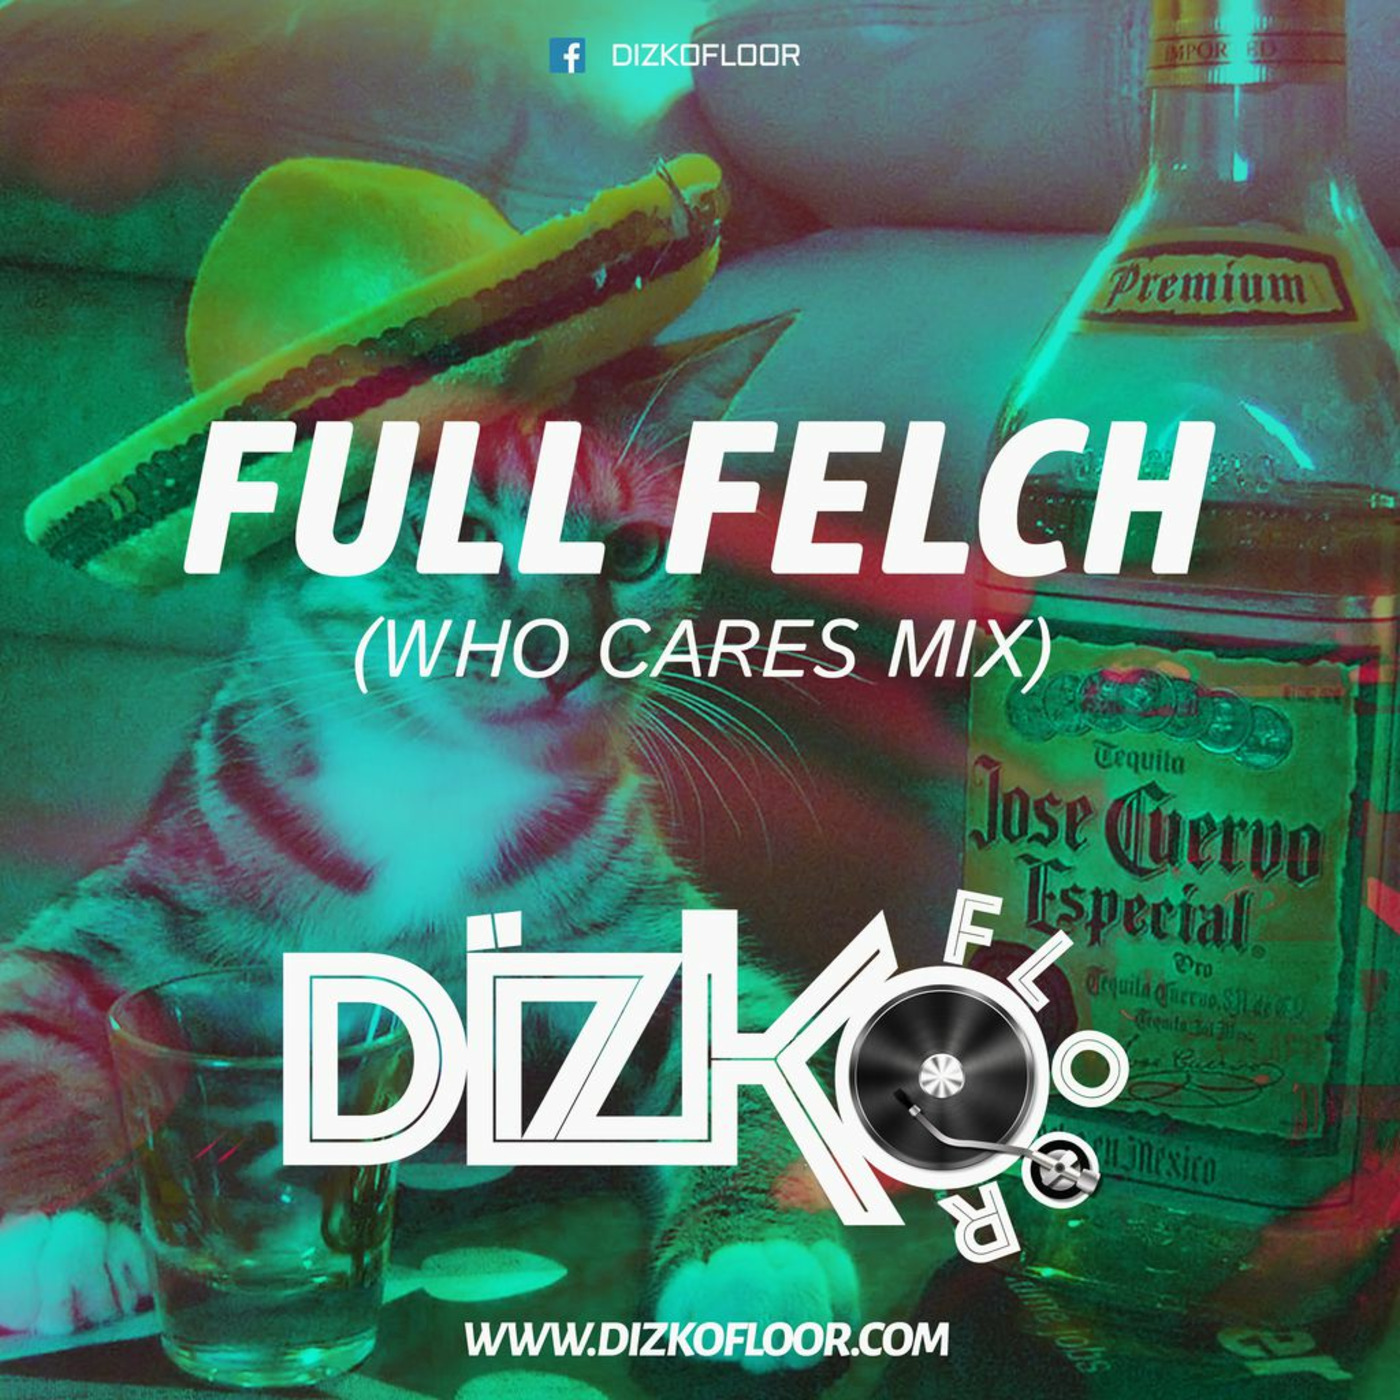 Full Felch (Who Cares Mix)